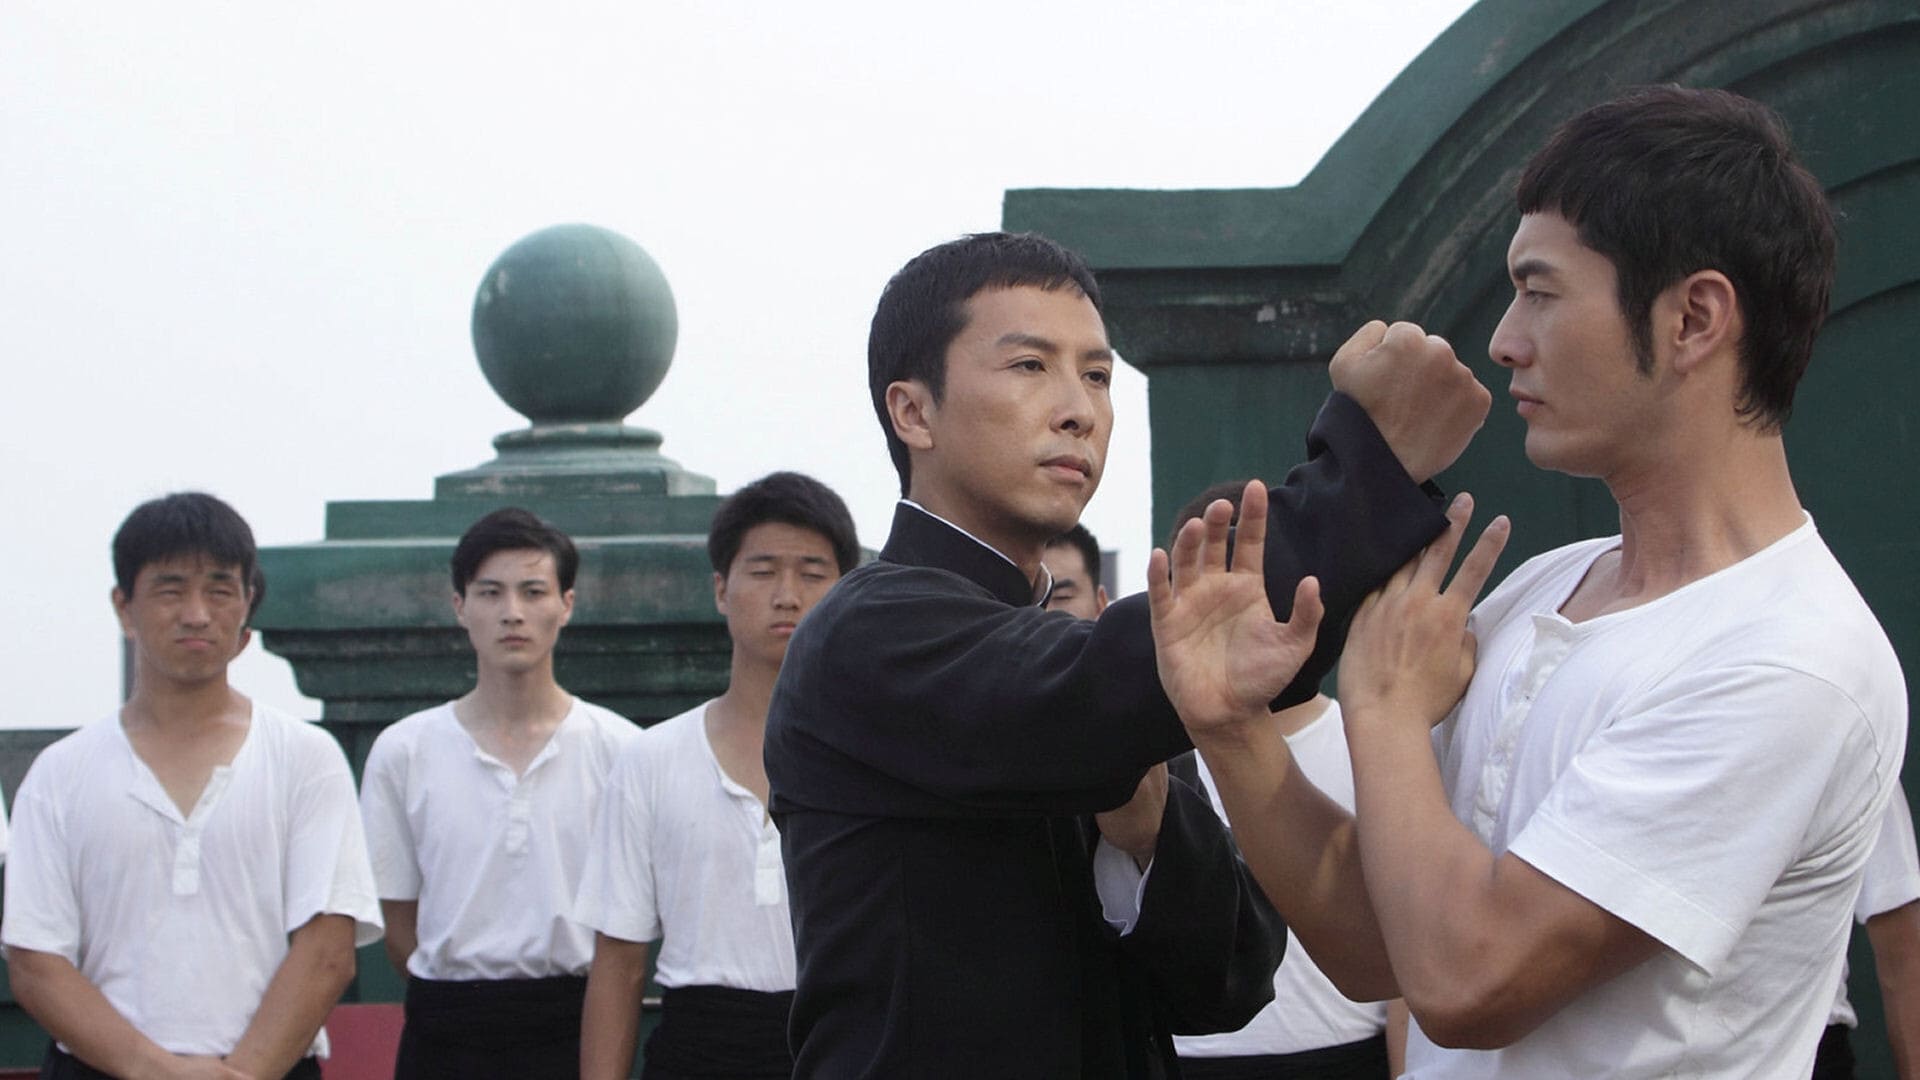 where can i watch ip man 2 for free